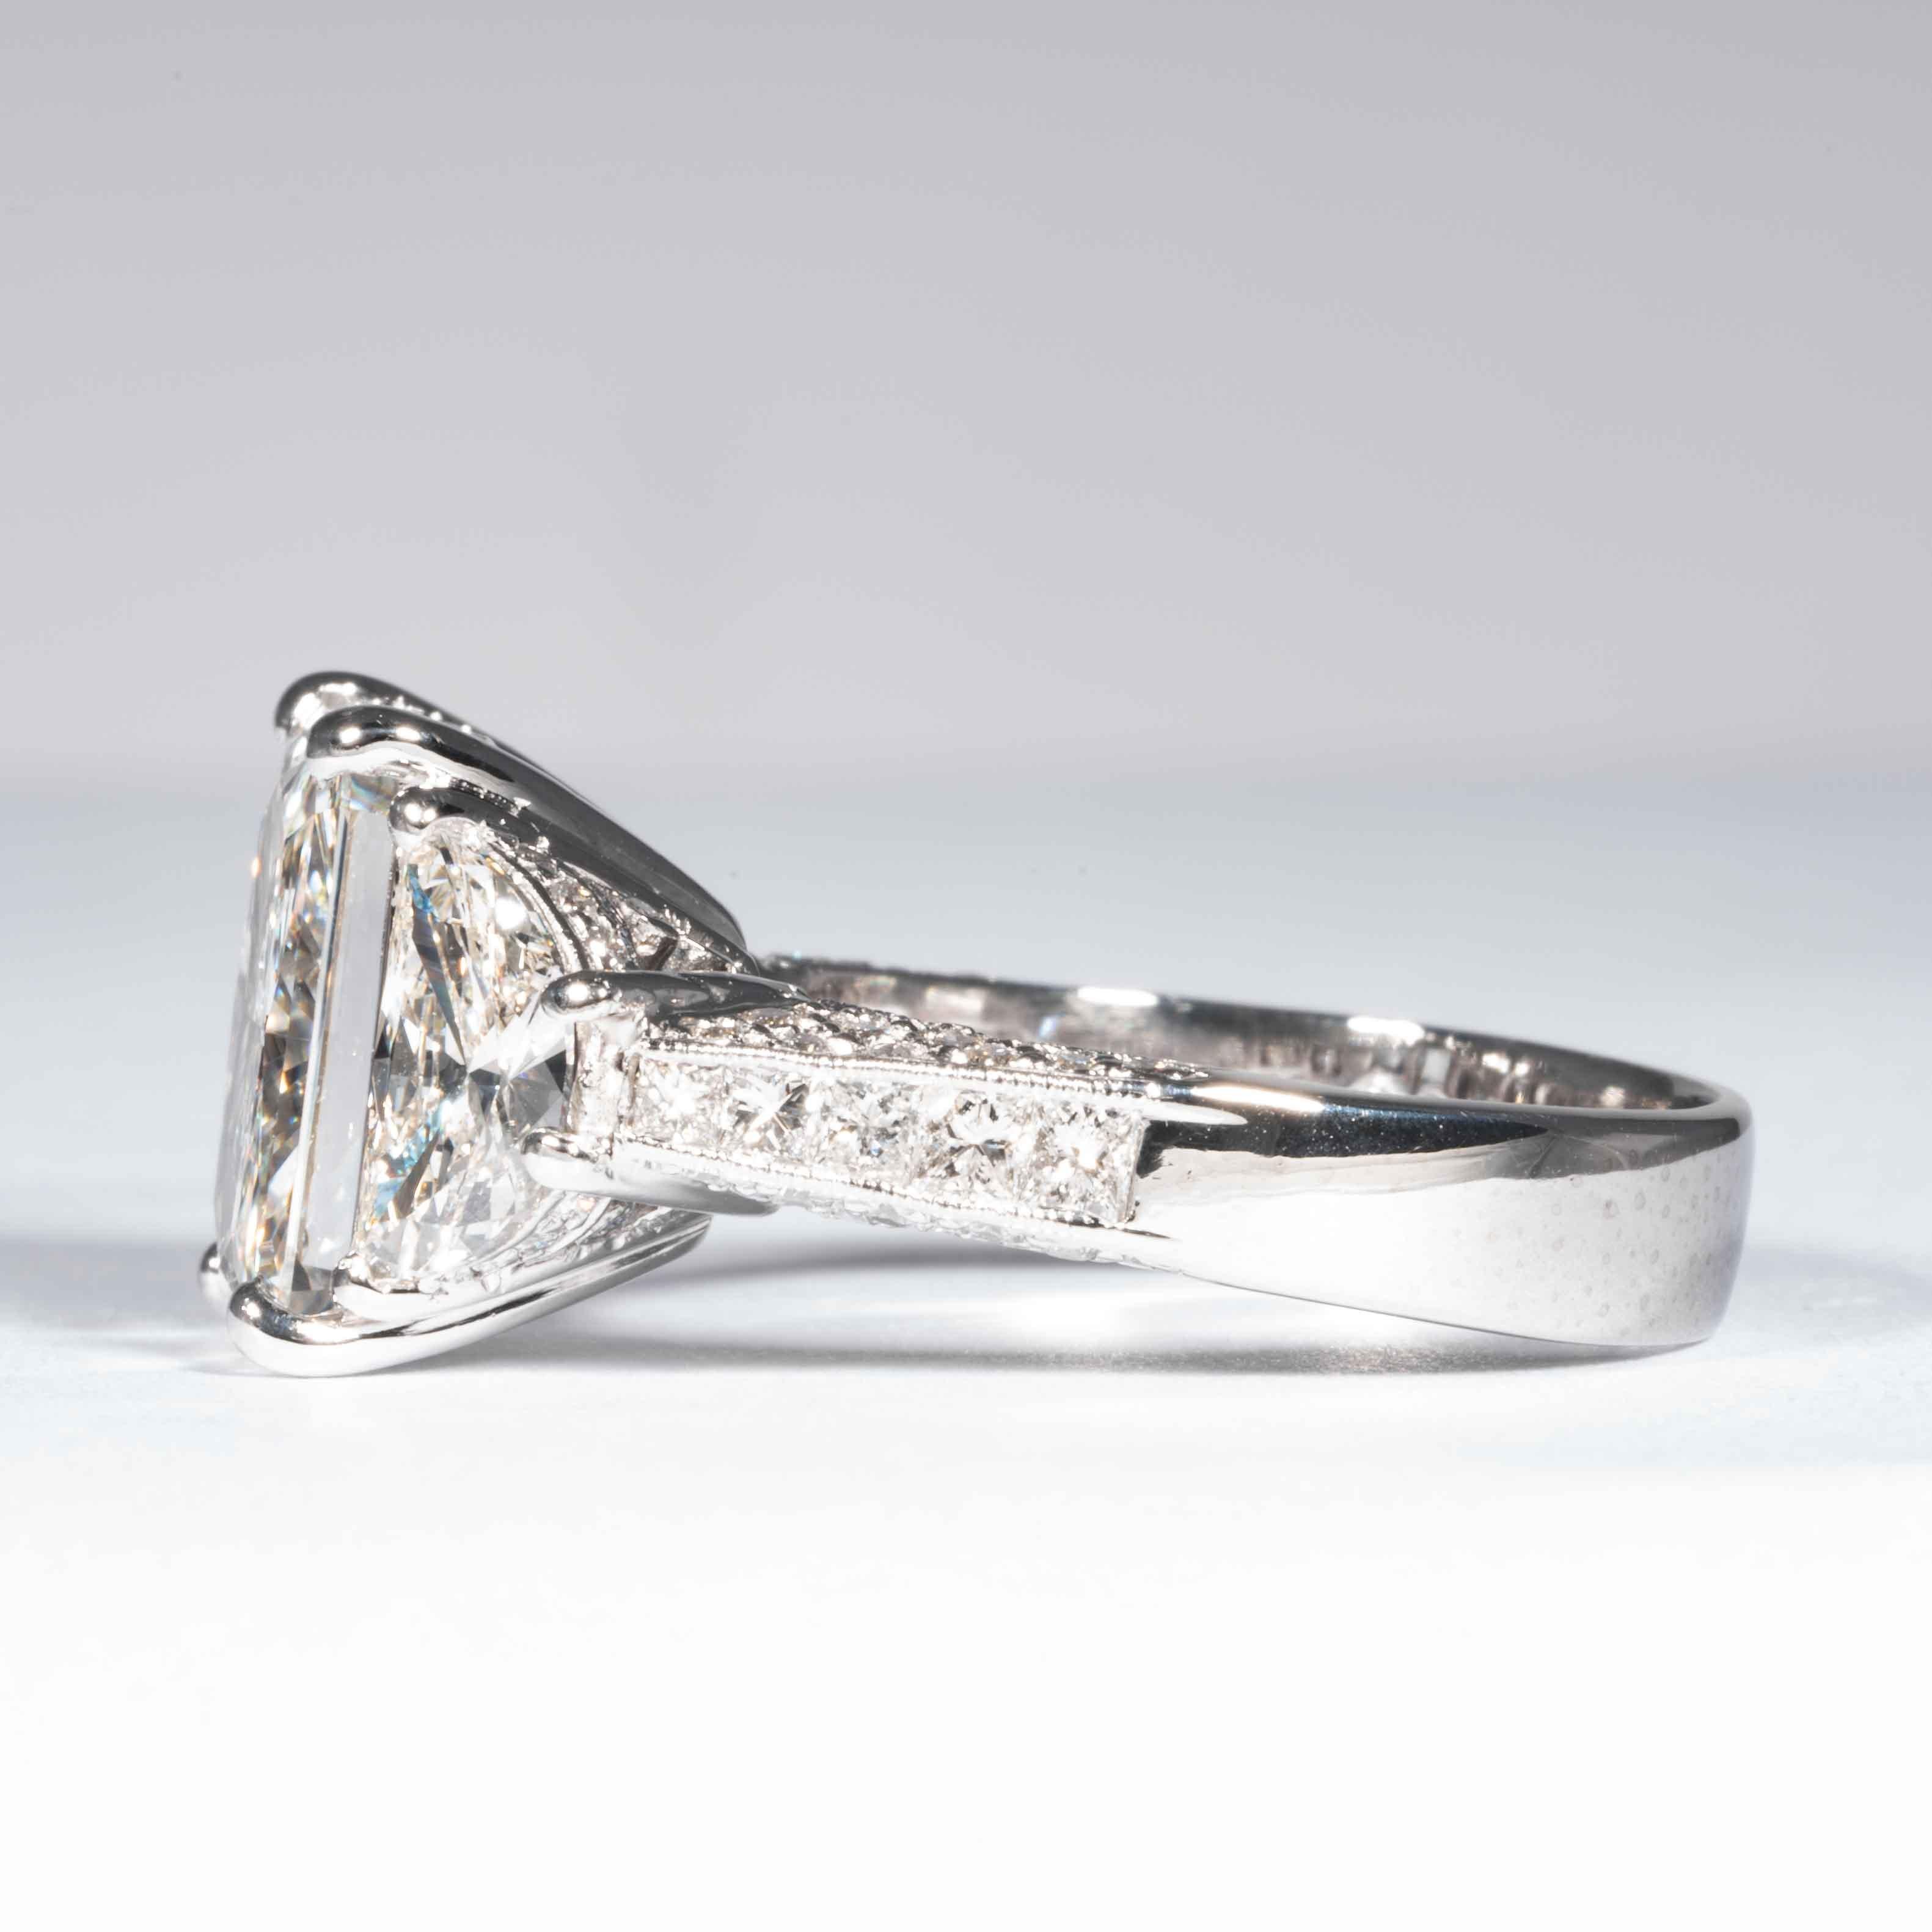 Shreve, Crump & Low GIA Certified 5.07 Carat I VS2 Radiant Cut Diamond Plat Ring In New Condition For Sale In Boston, MA